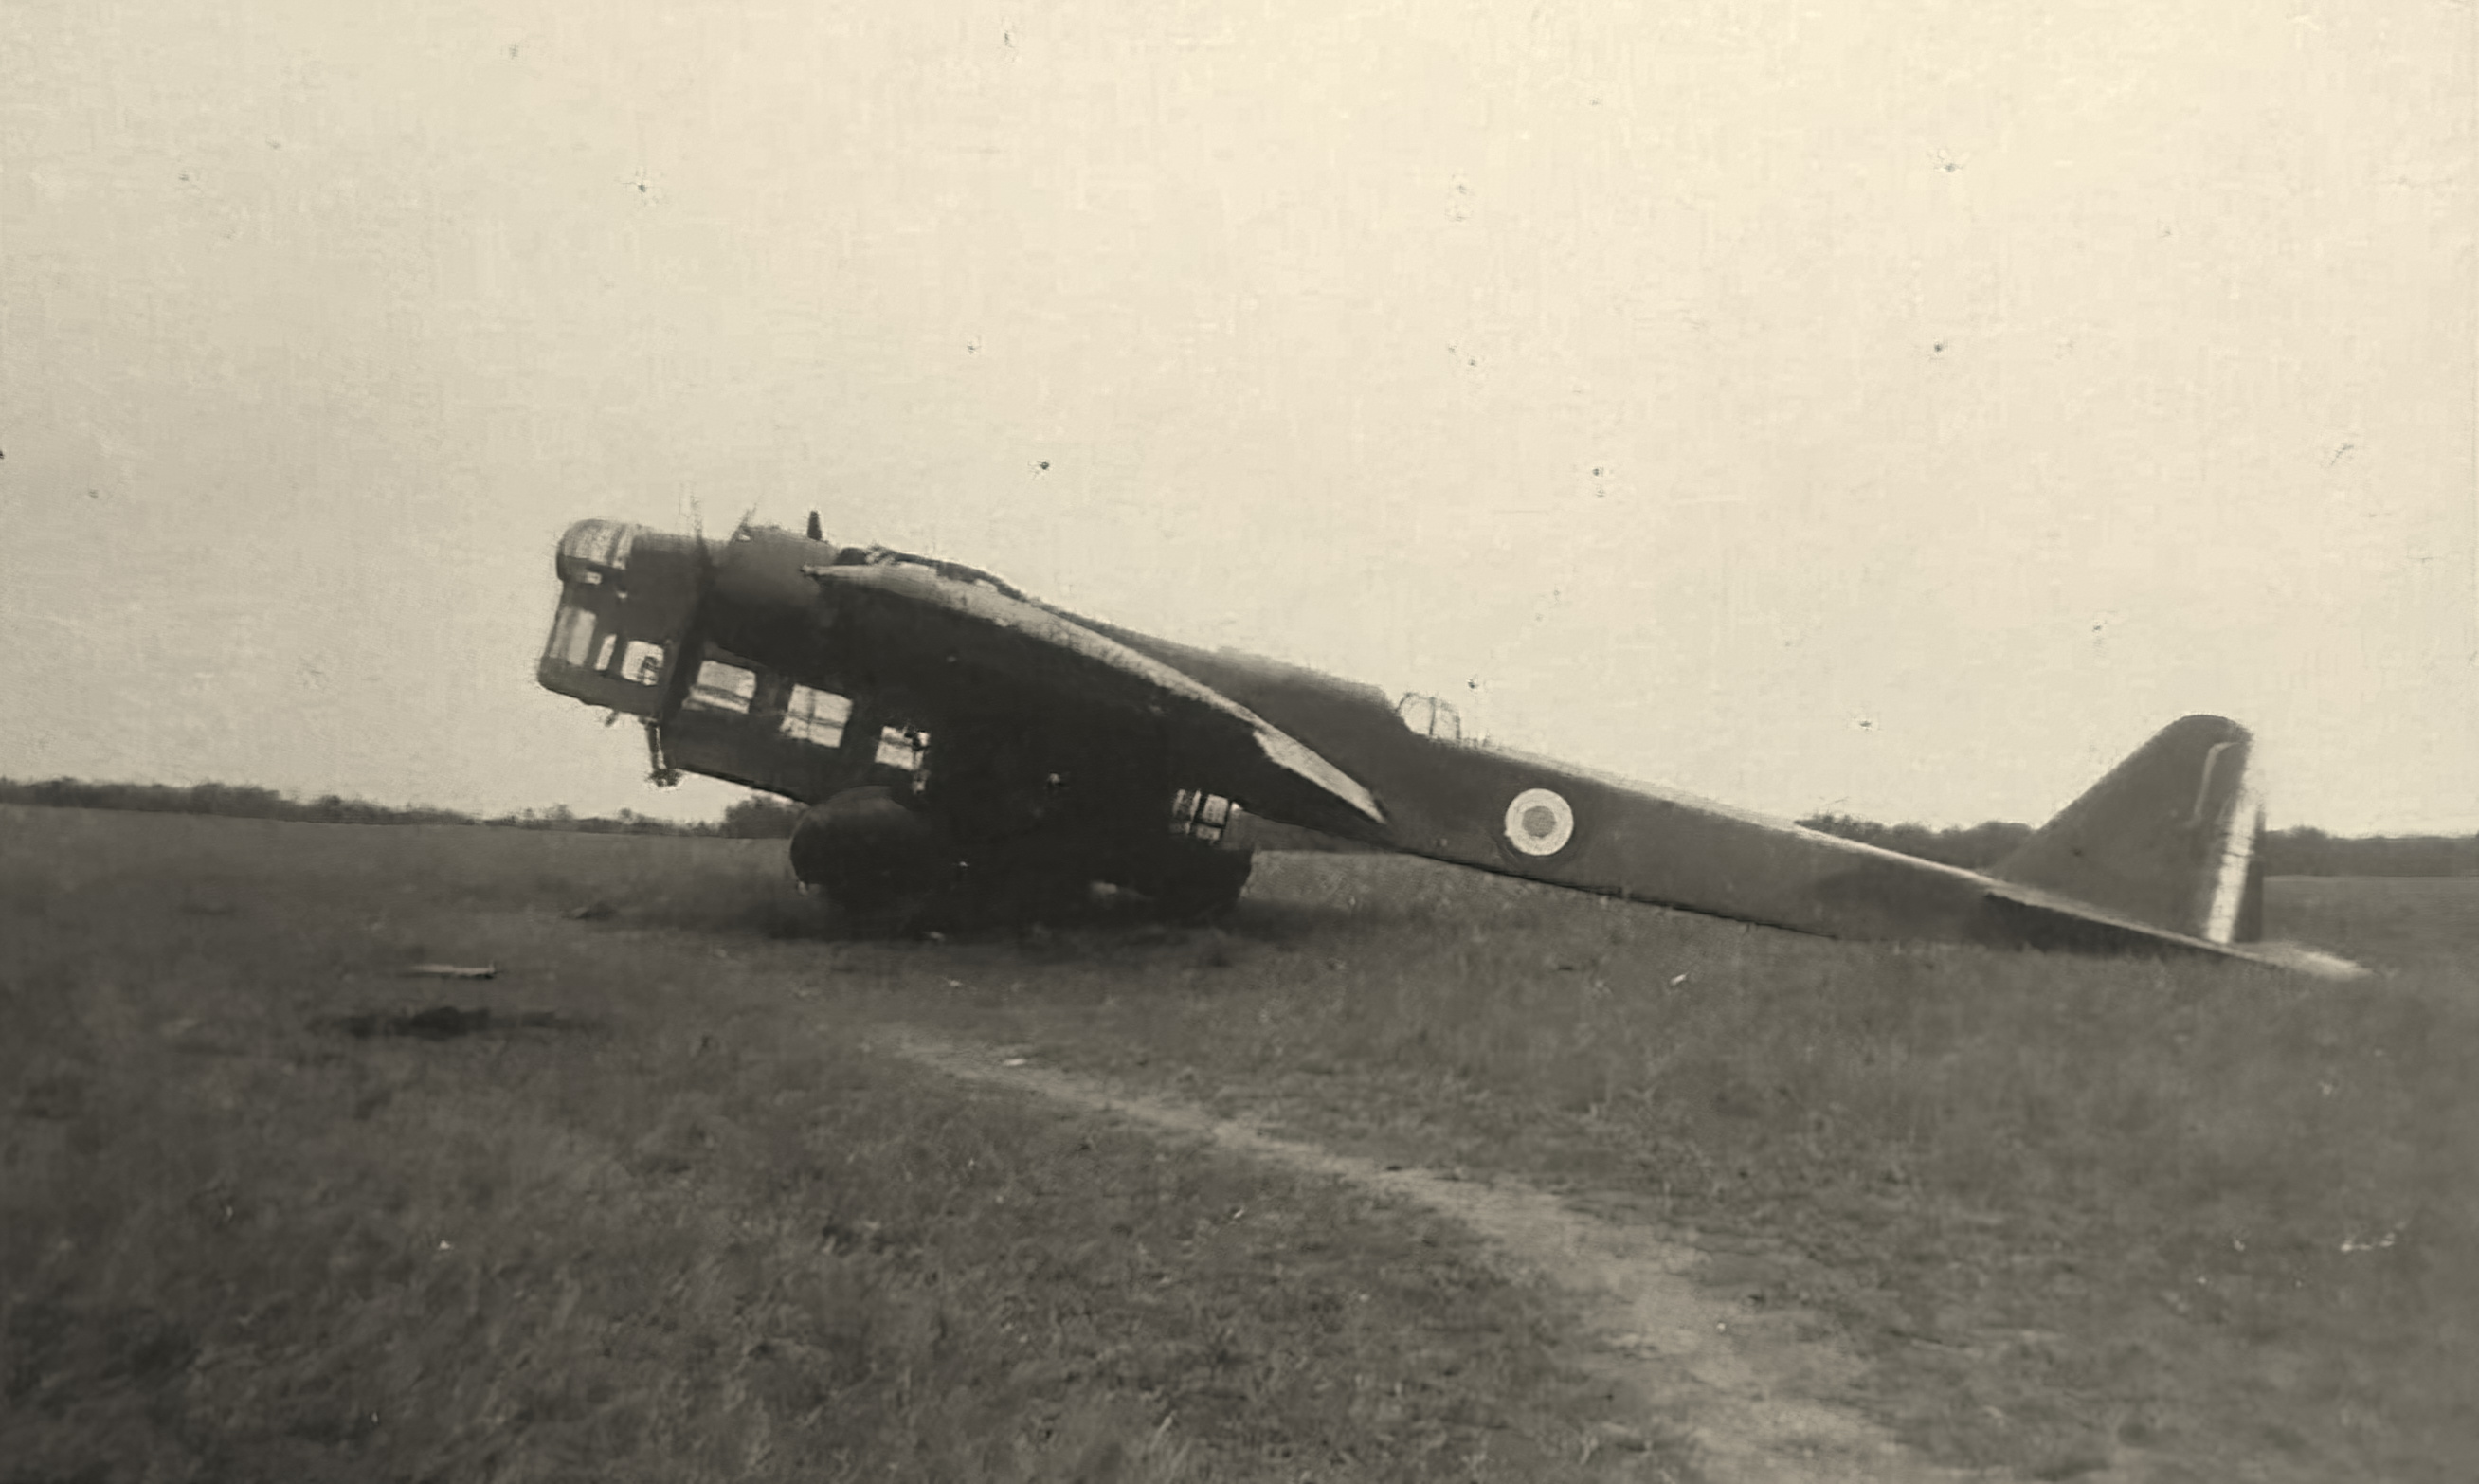 French Airforce Amiot 143 sits abandoned after the fall of France June 1940 ebay 07